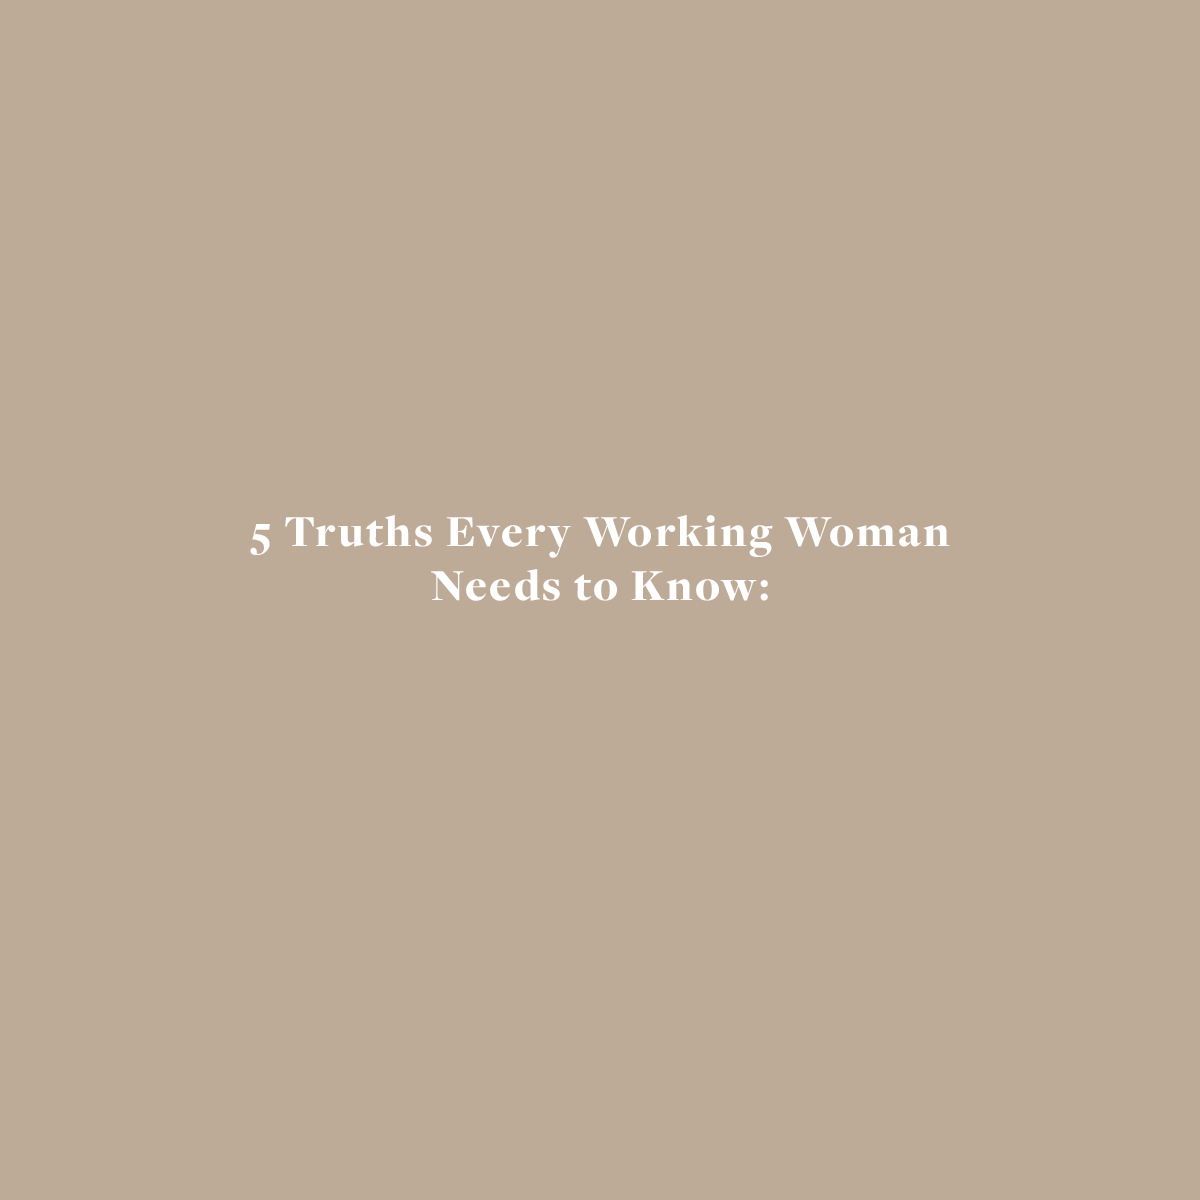 5 Truths Every Working Woman Needs to Know